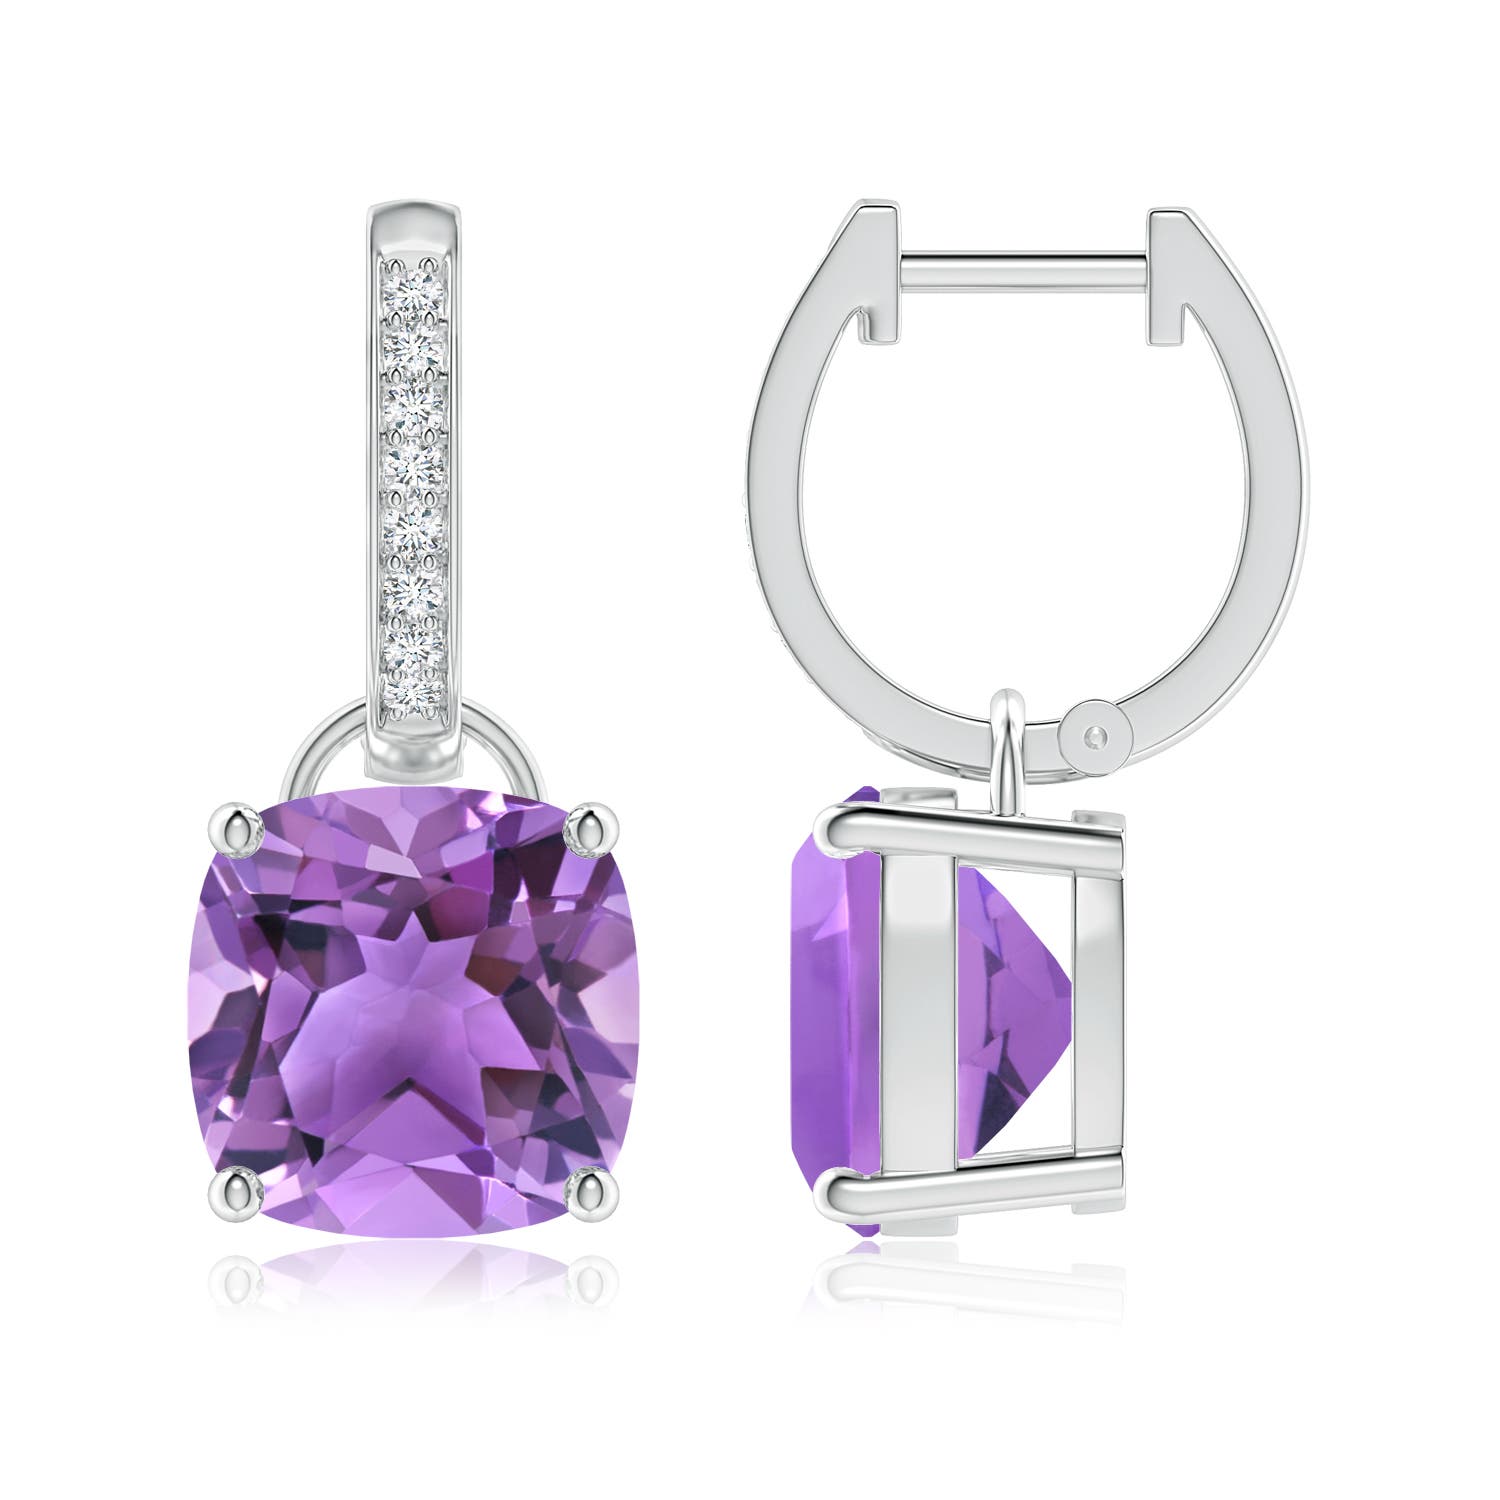 AA - Amethyst / 6.33 CT / 14 KT White Gold